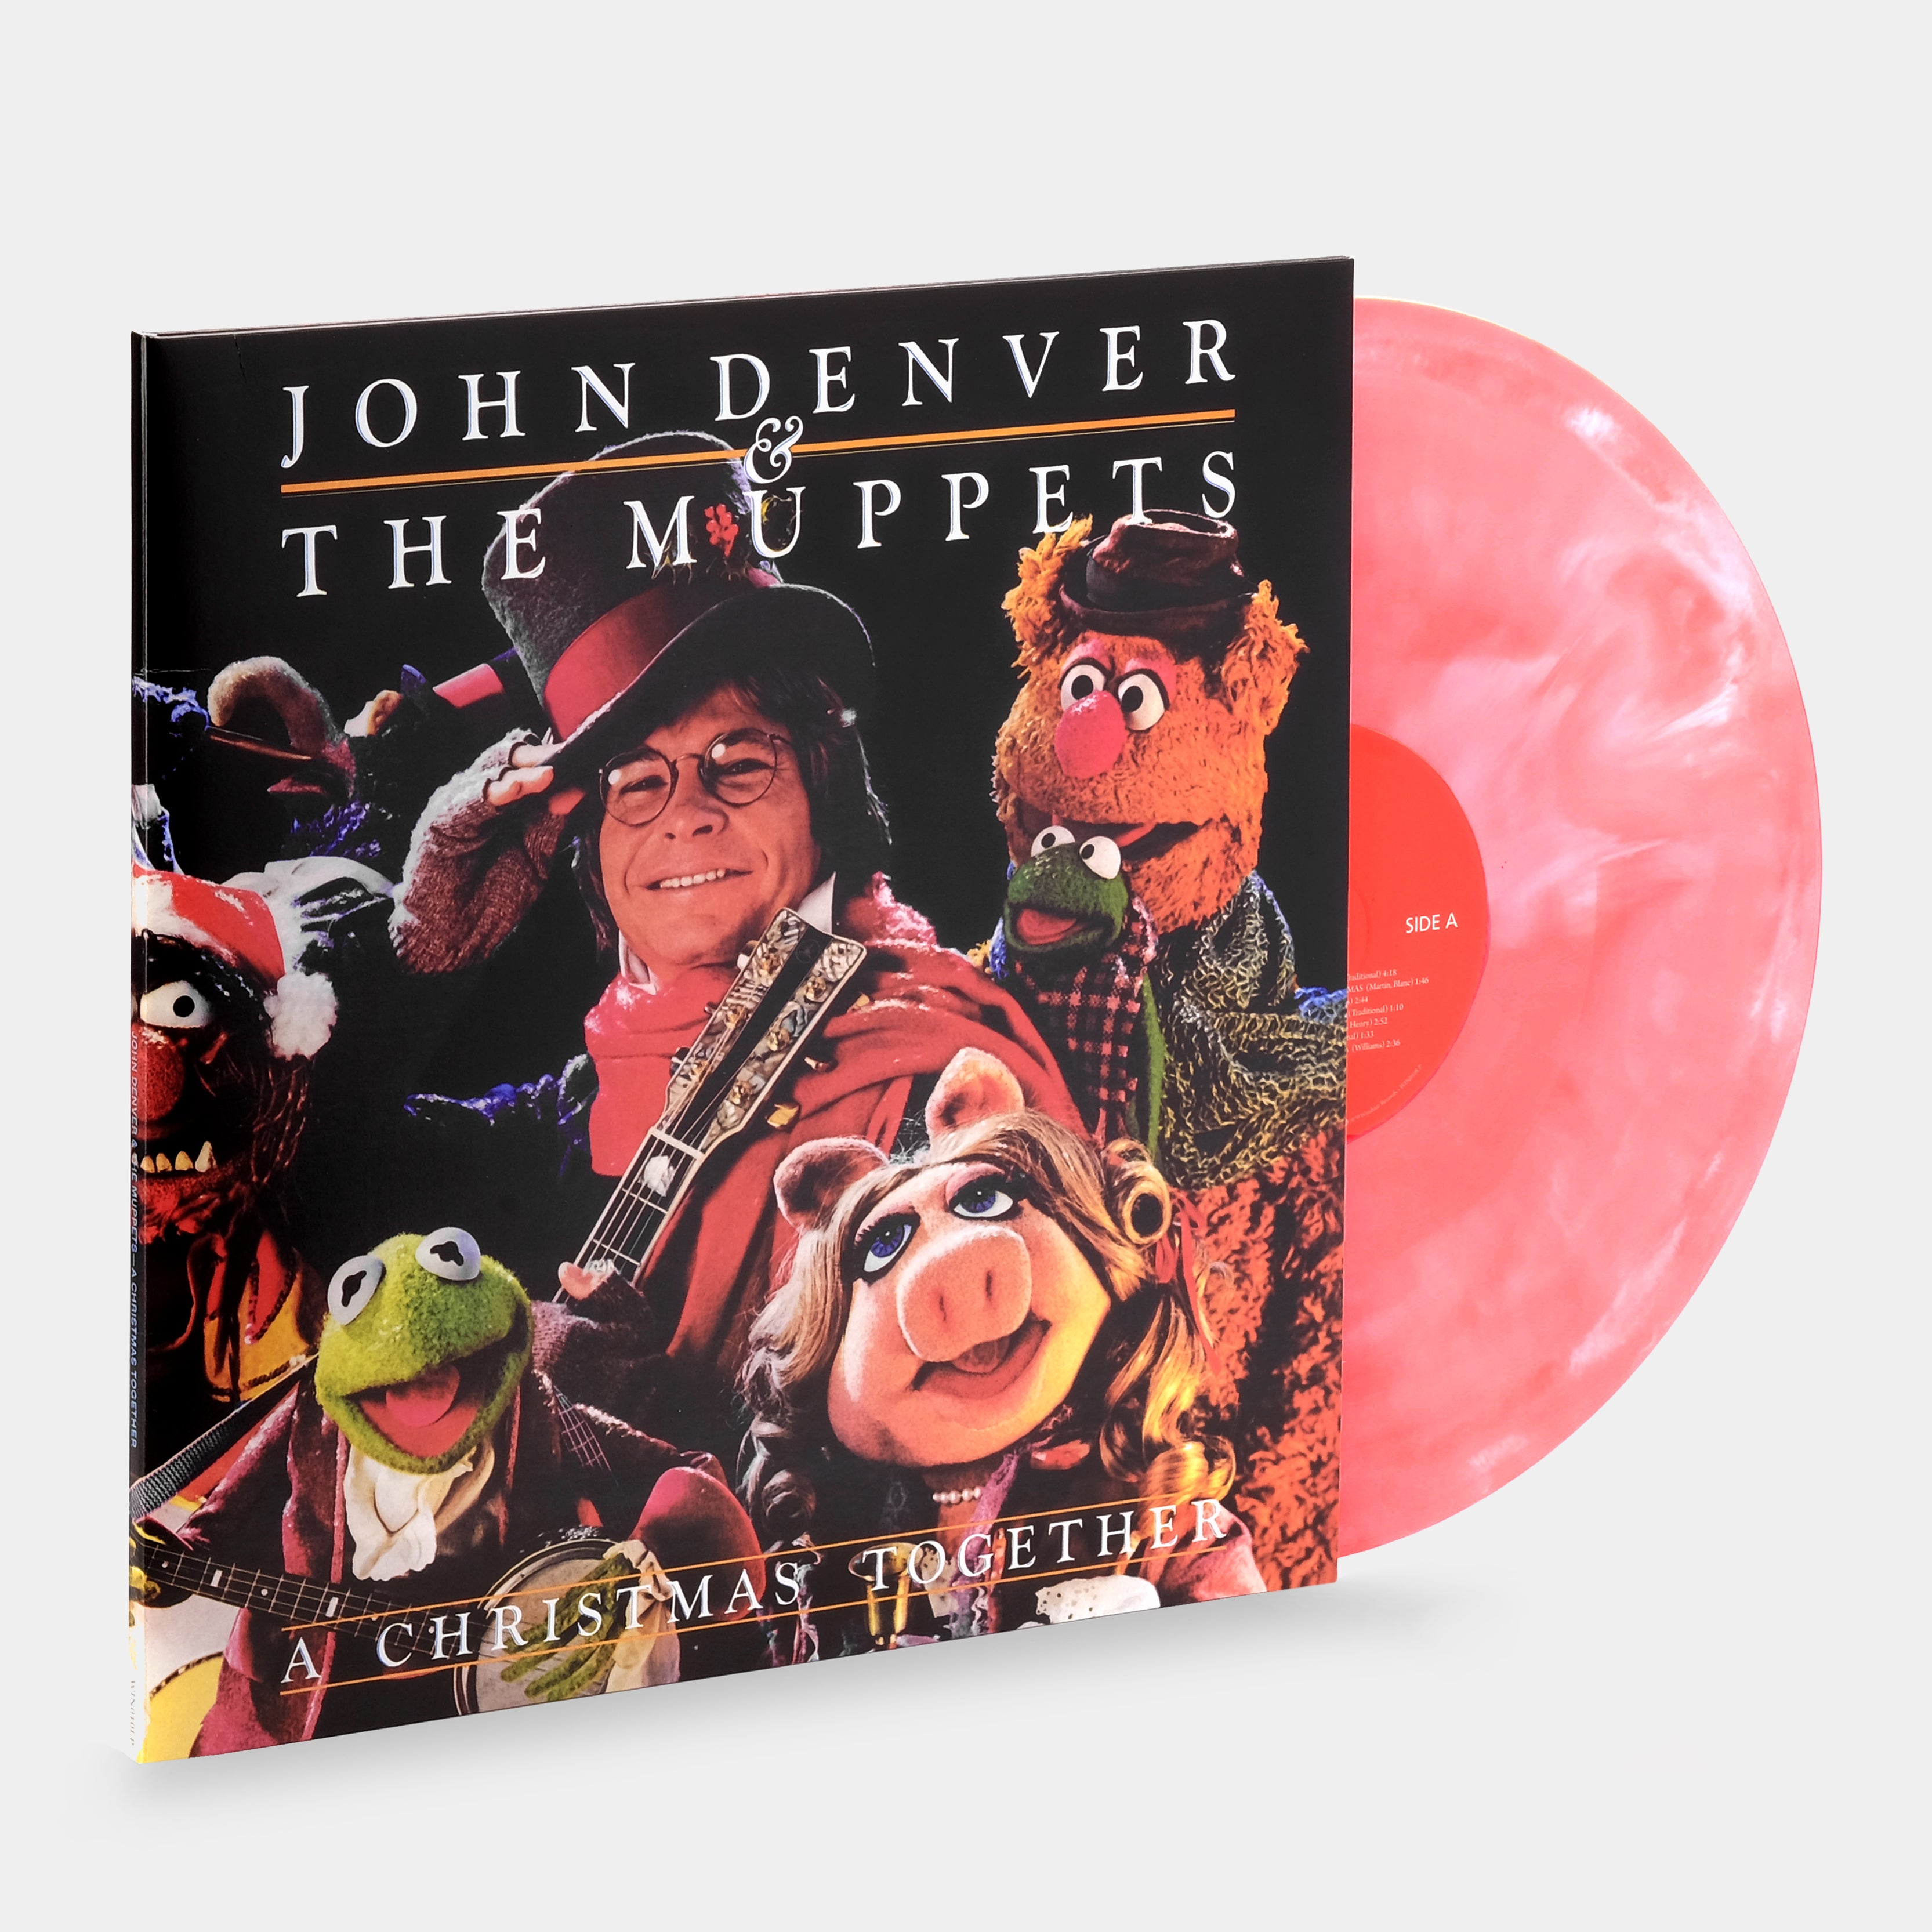 John Denver & The Muppets - A Christmas Together LP Candy Cane Swirl Vinyl Record